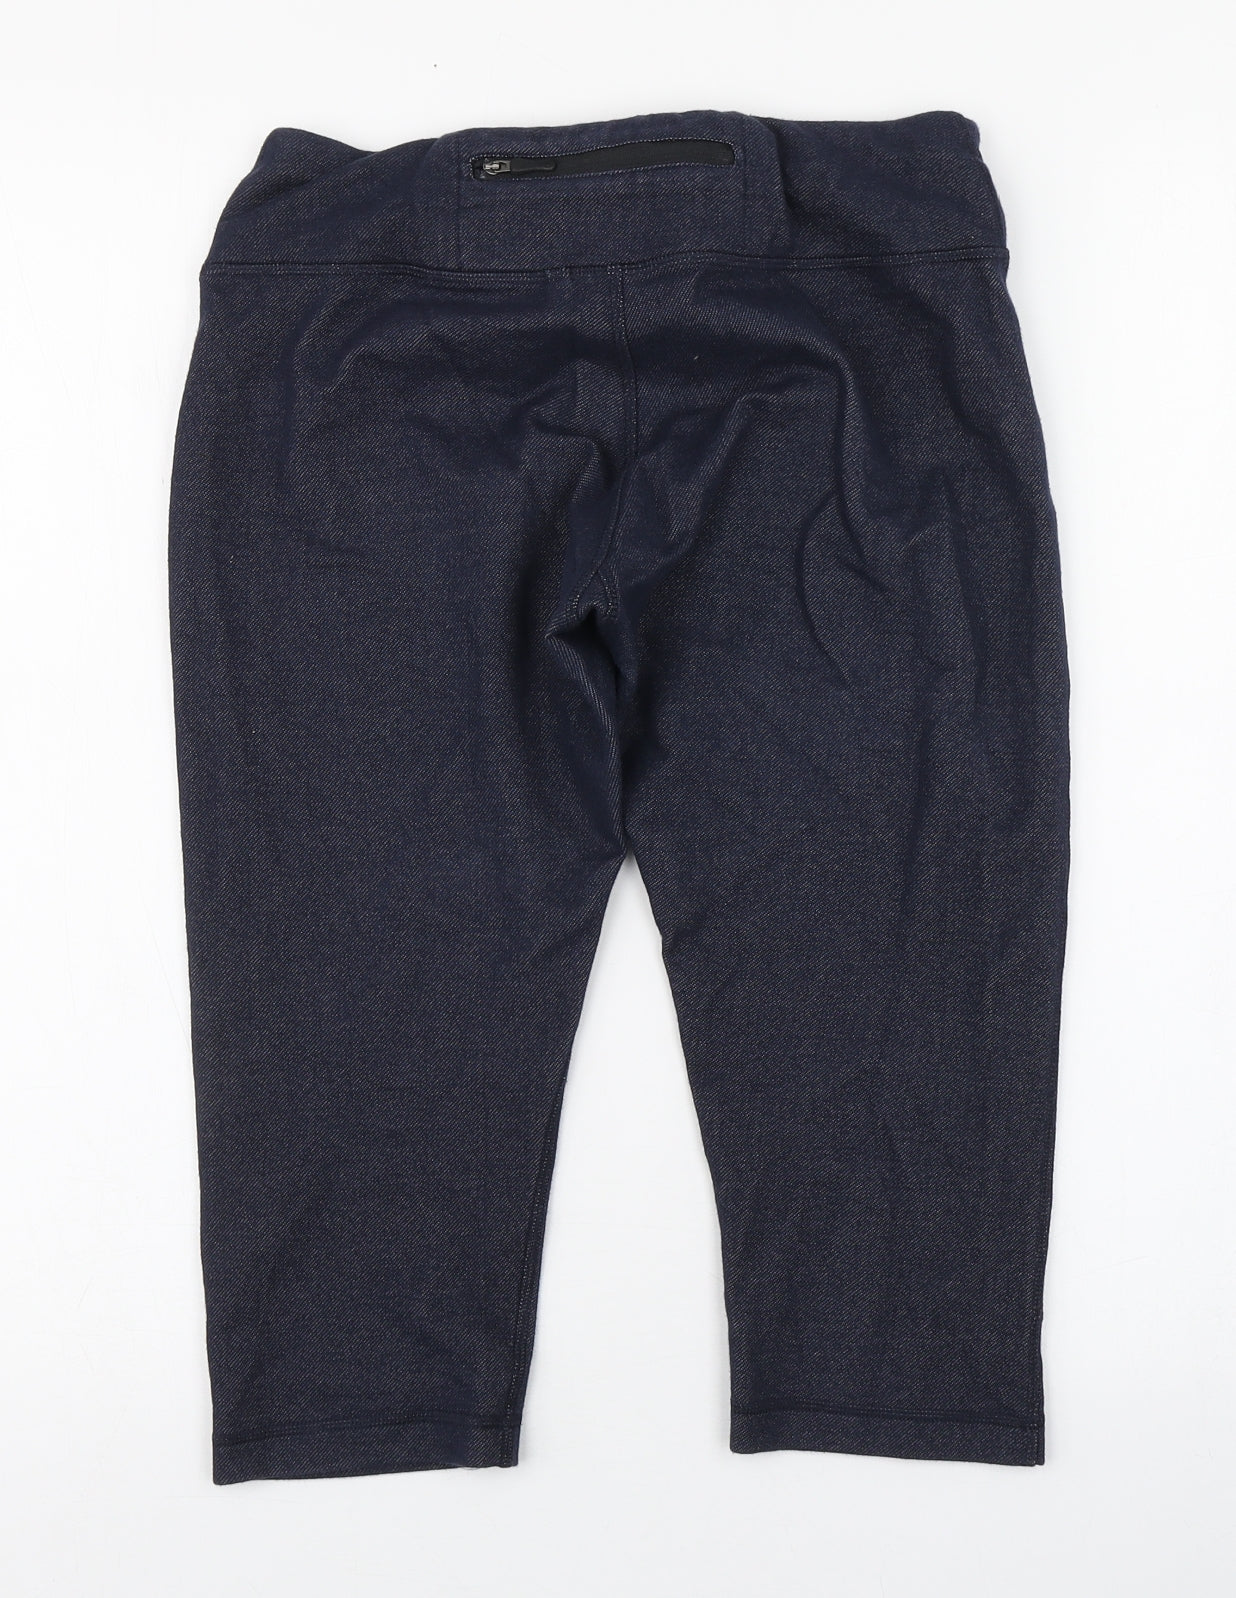 NEXT Womens Blue  Cotton Jogger Leggings Size 10 L16 in Regular  - Cropped